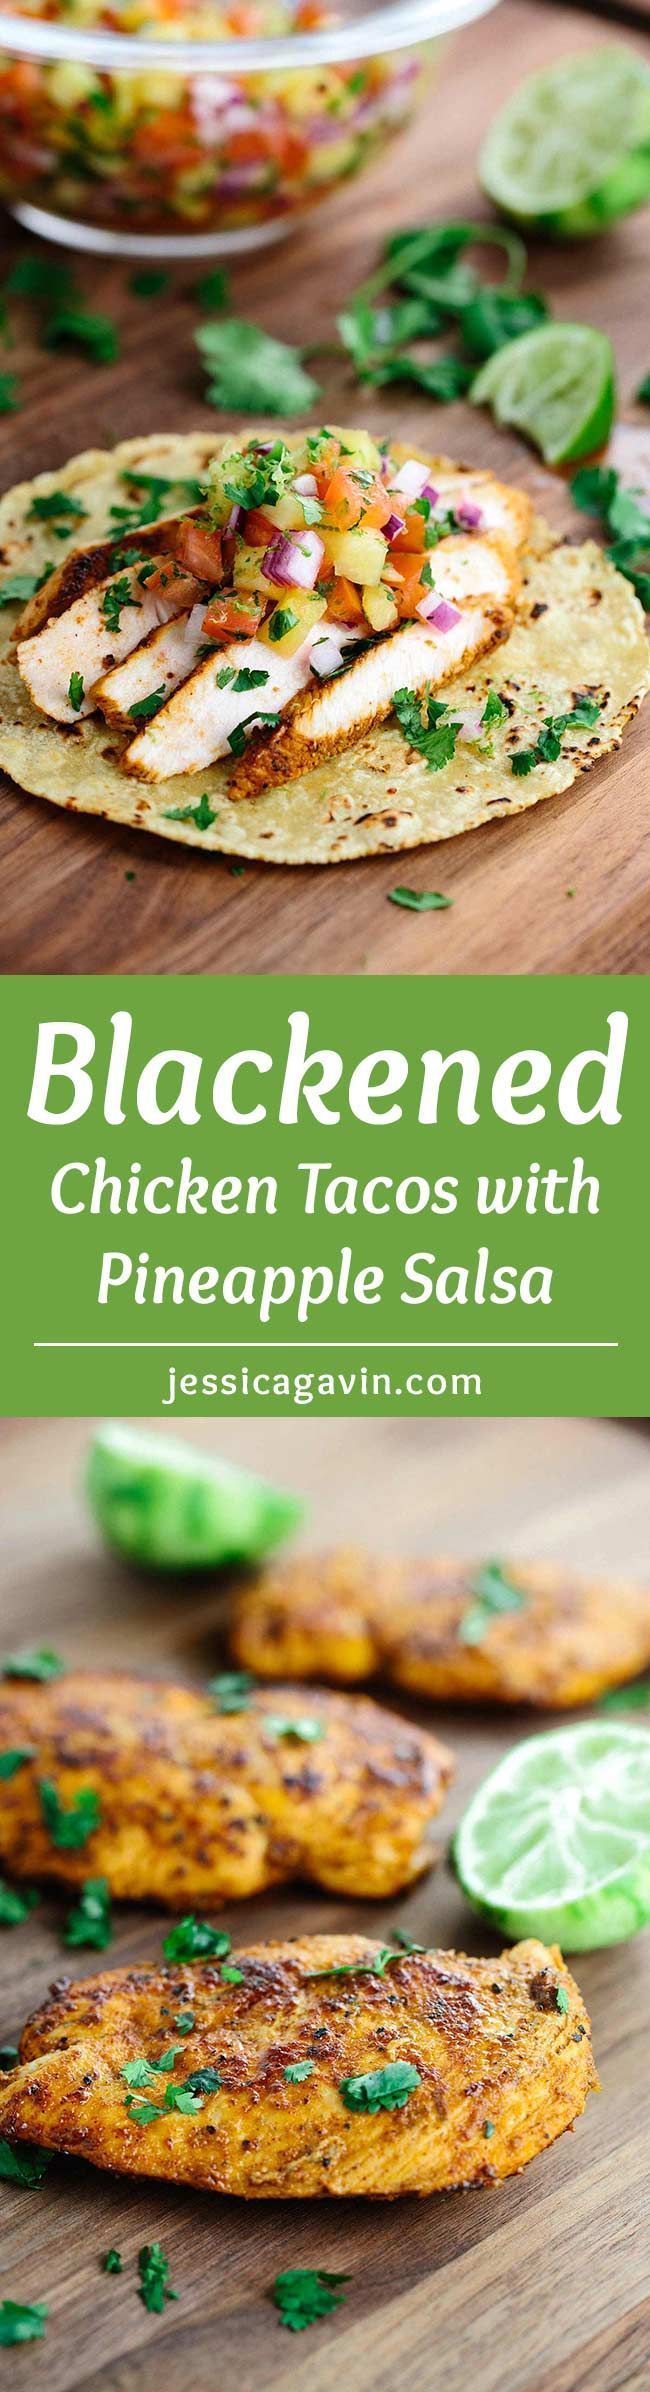 Blackened Chicken Tacos with Pineapple Salsa – This recipe will make any day feel